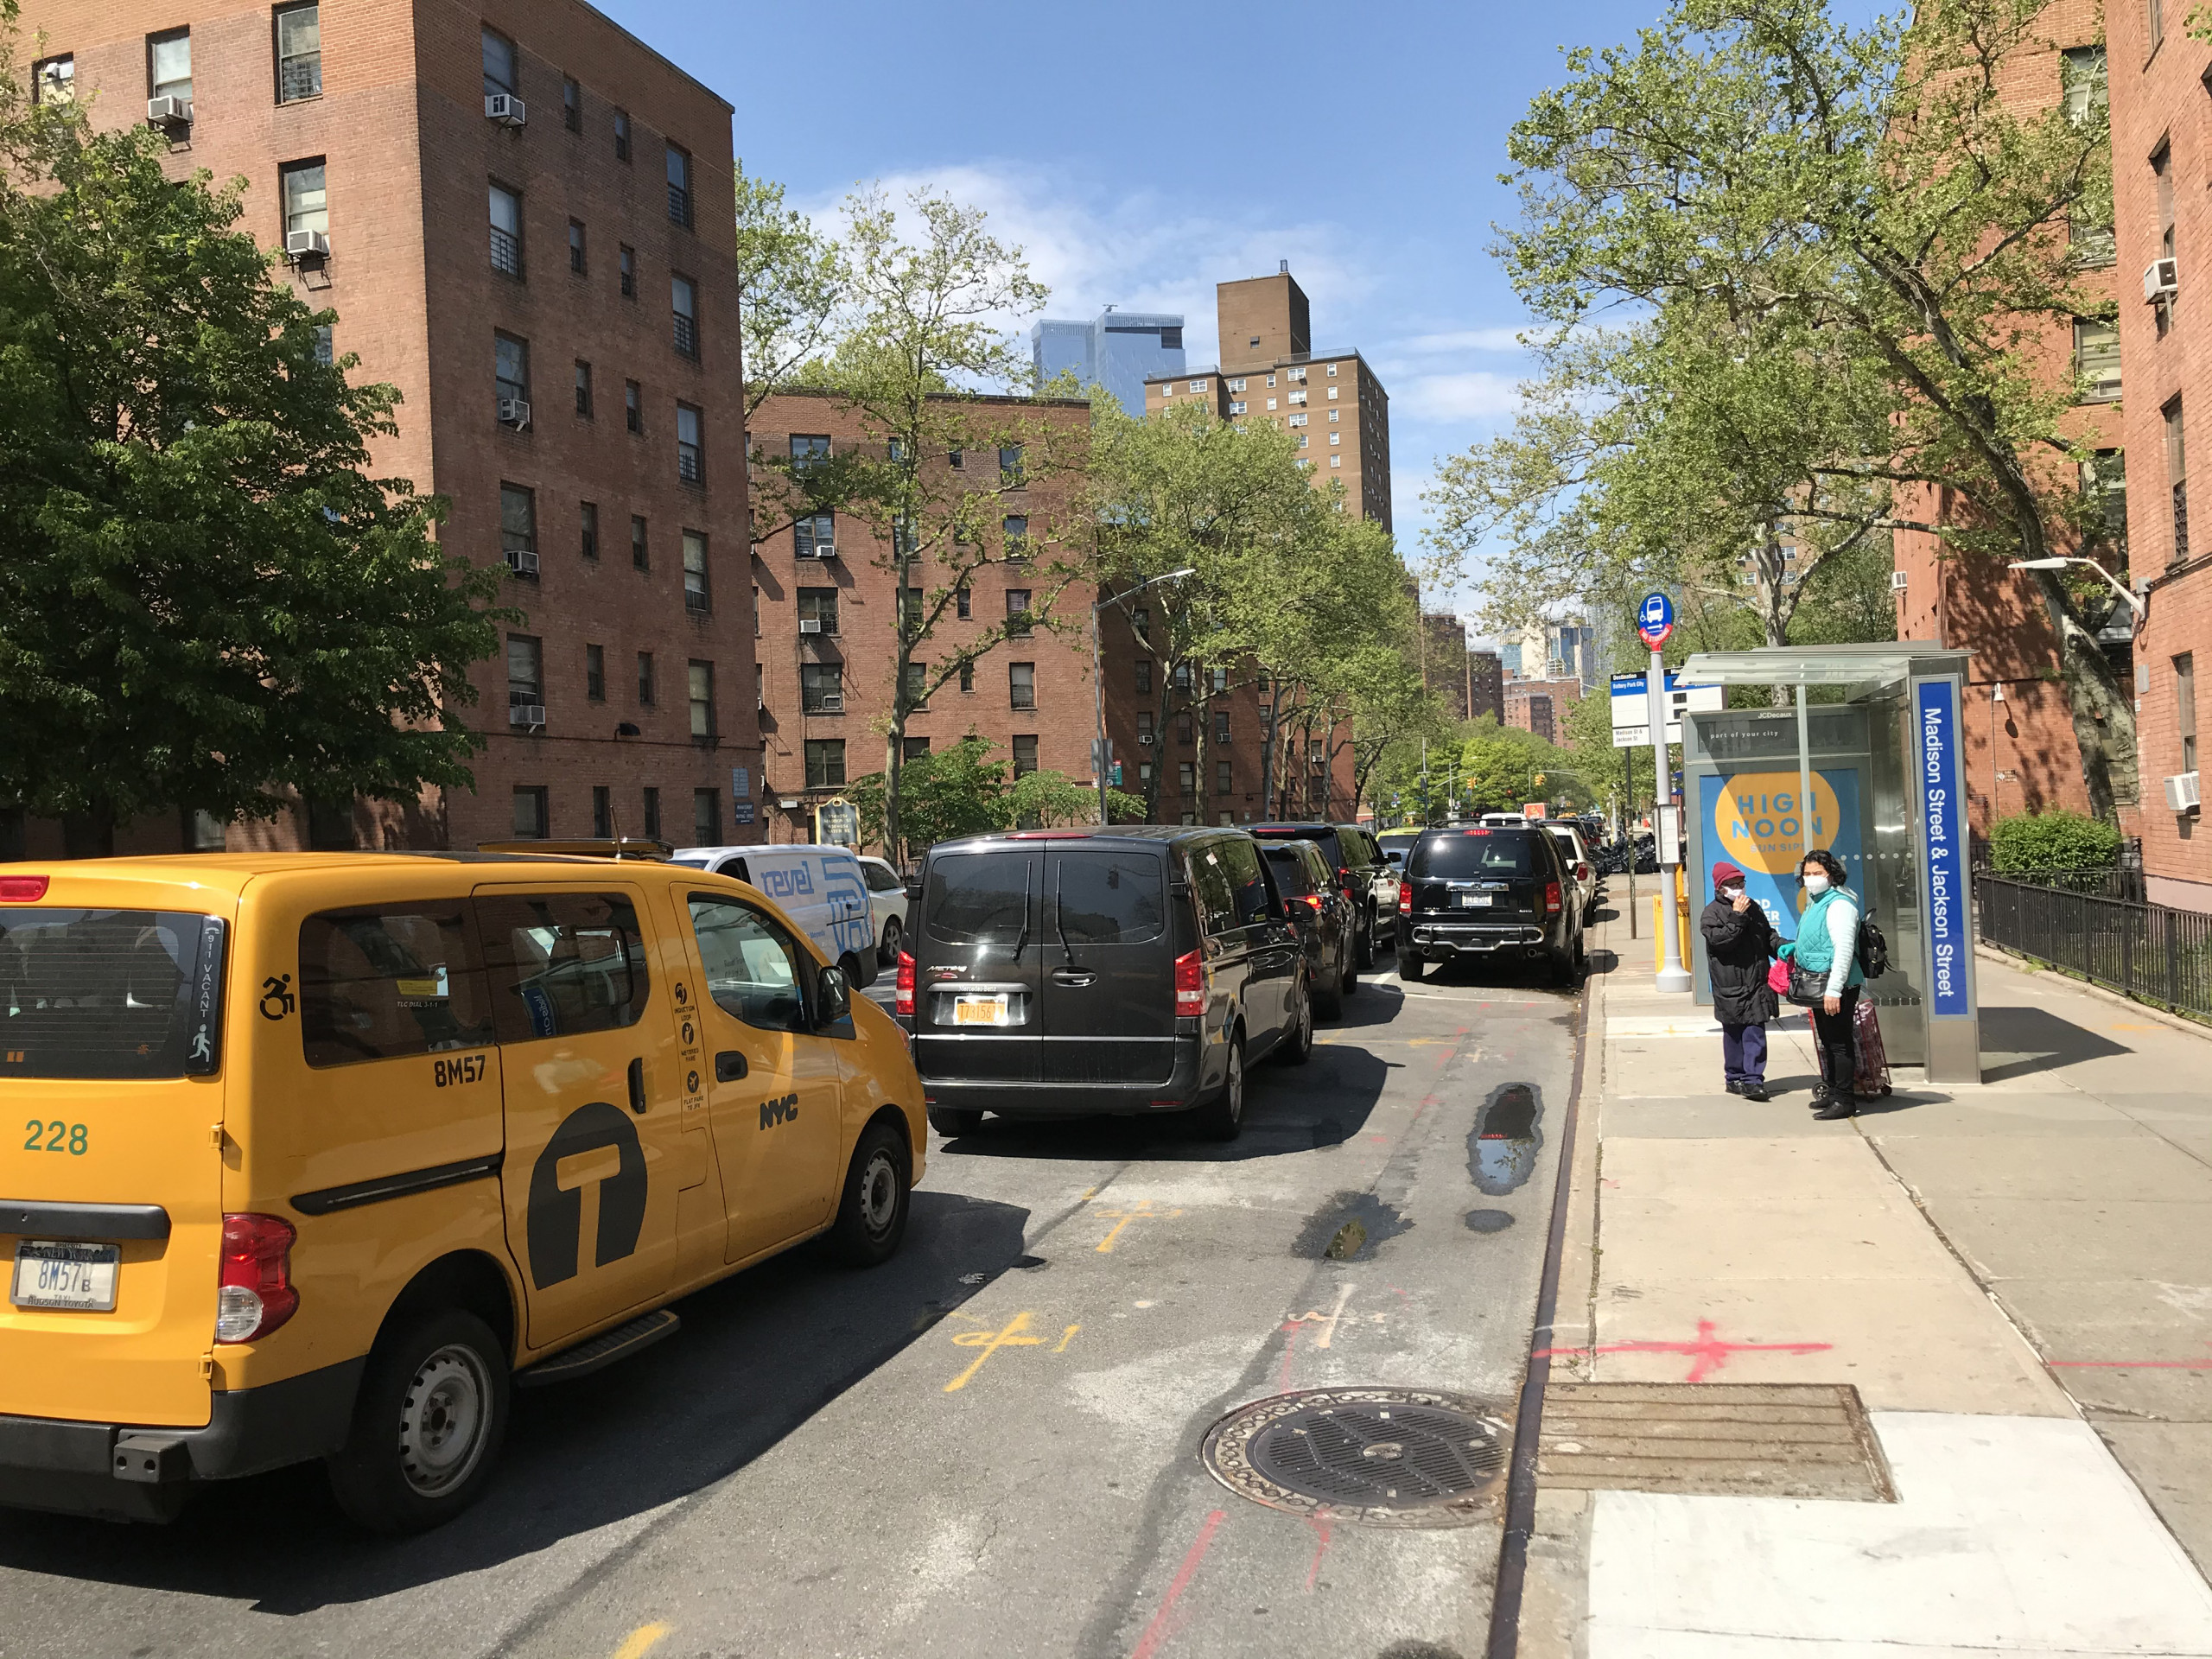 NYC taxis and for-hire vans lined up on a city street between low brick towers